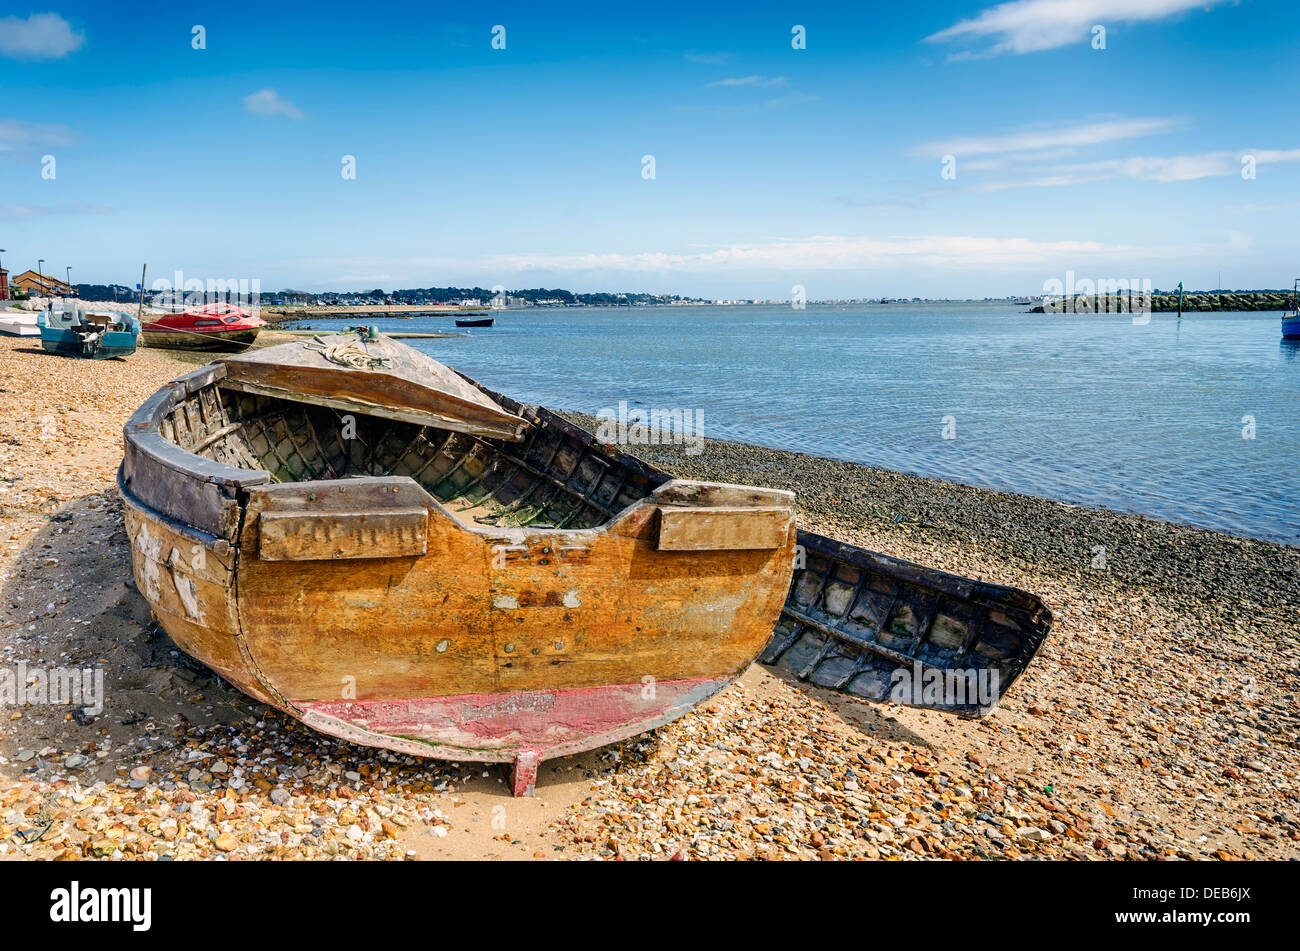 An old wrecked wooden boat on the shore at Poole in Dorset Stock Photo